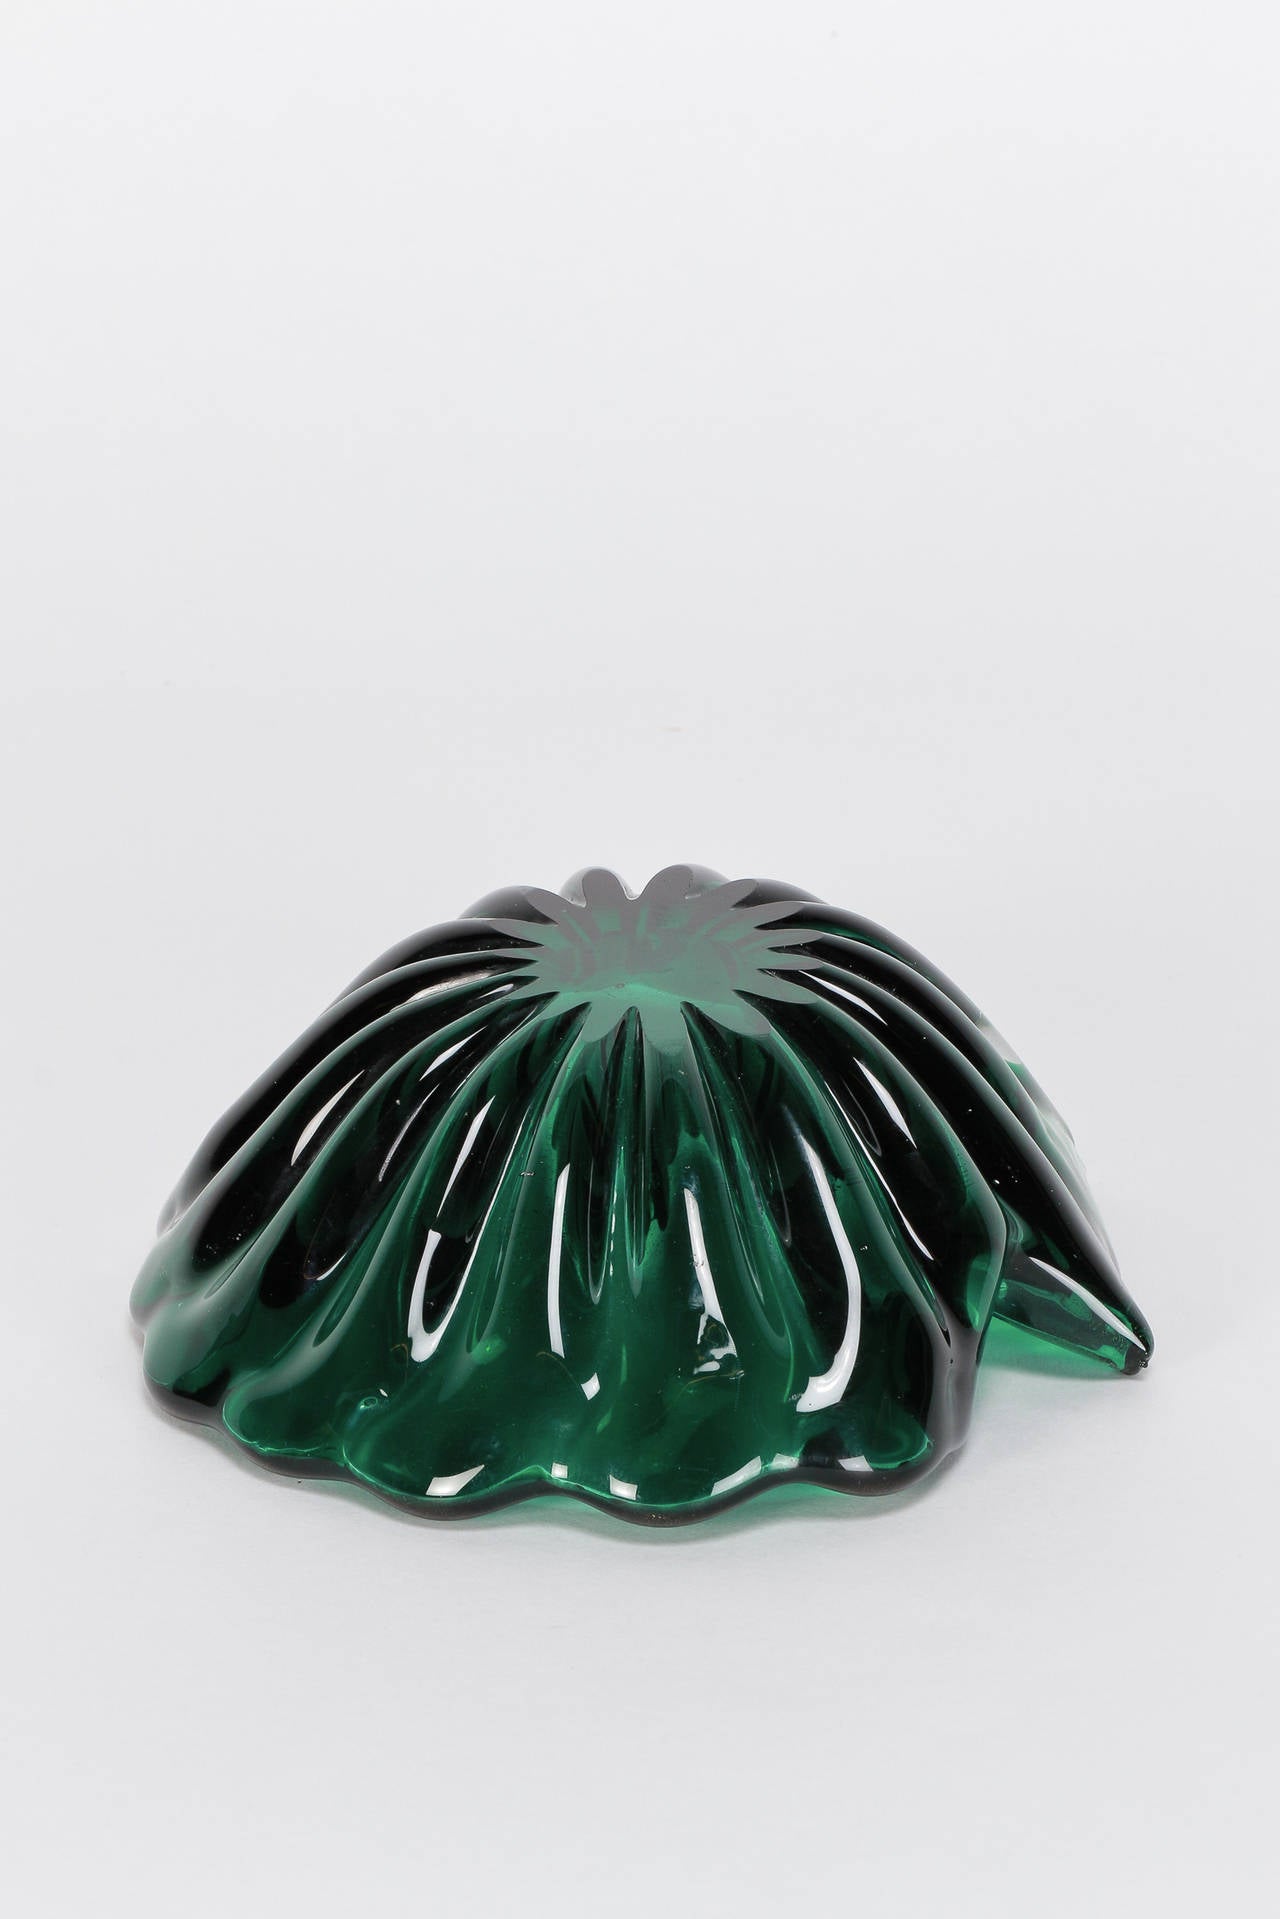 Inlay Green Gold Italian Murano Shell Bowl in the style of Barovier & Toso, 1960s For Sale